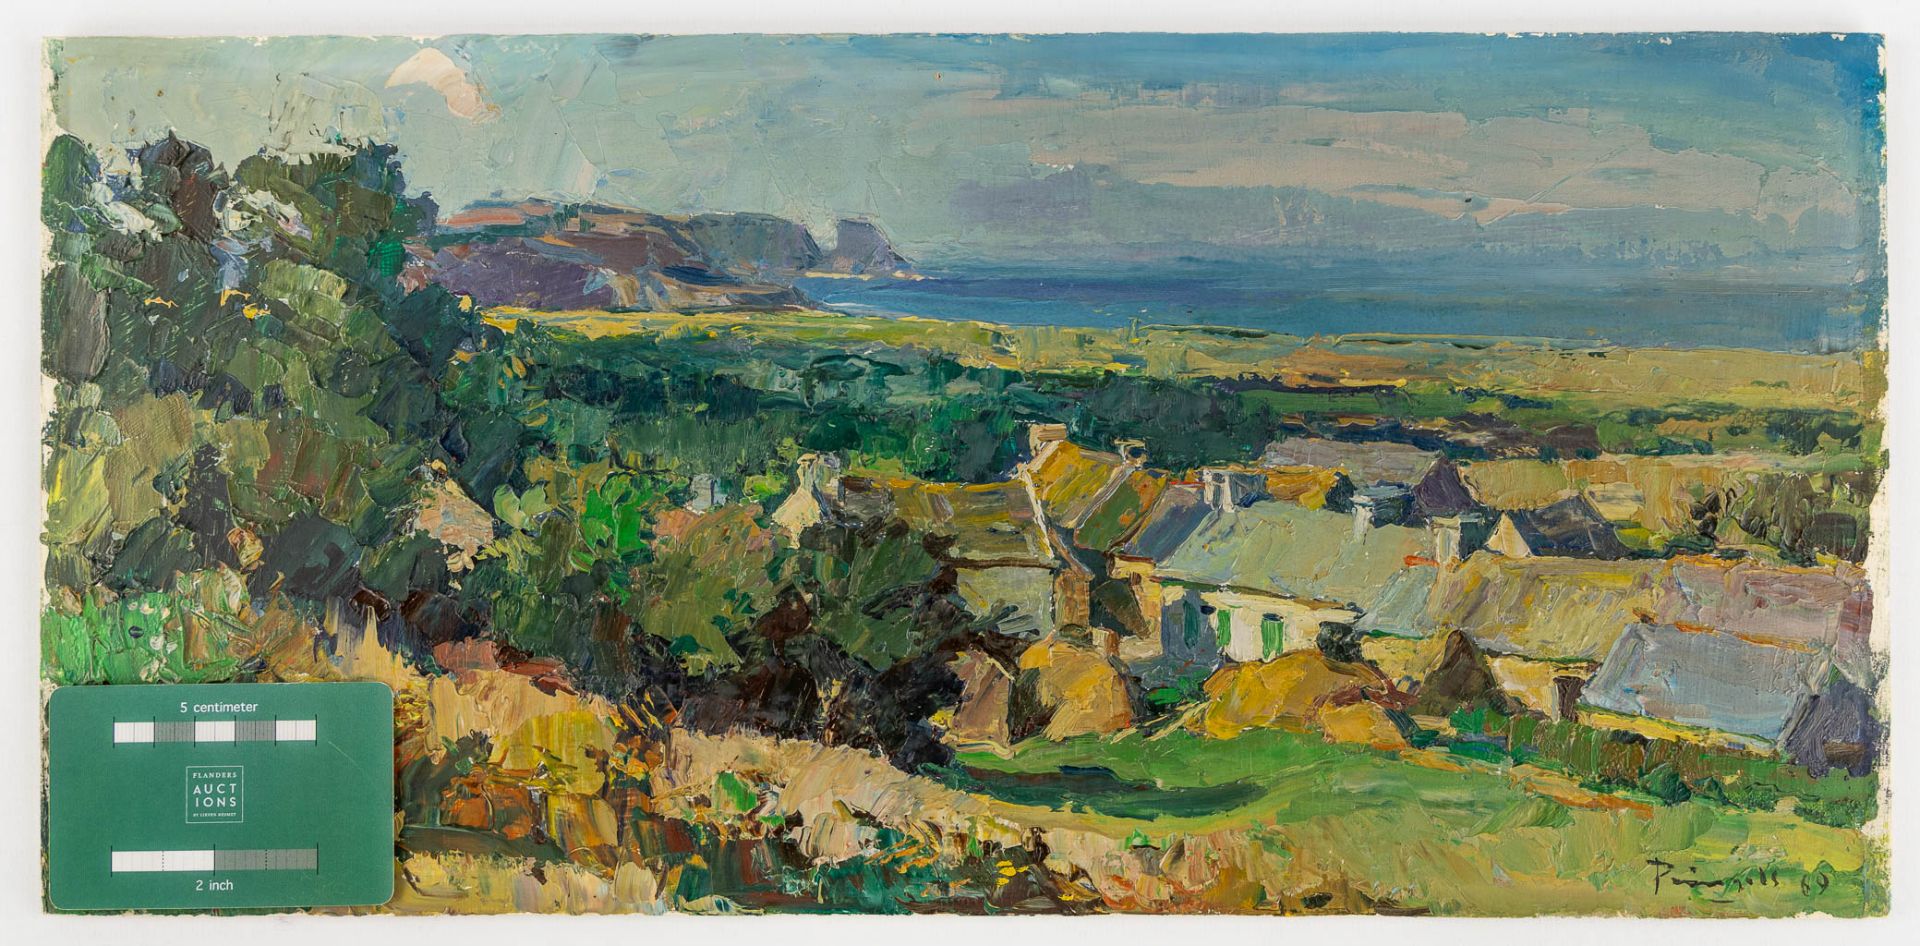 Leo PRINGELS (1901-1992) 'Lansdscape of the Normandic coast' oil on board. (W:46 x H:22 cm) - Image 2 of 7